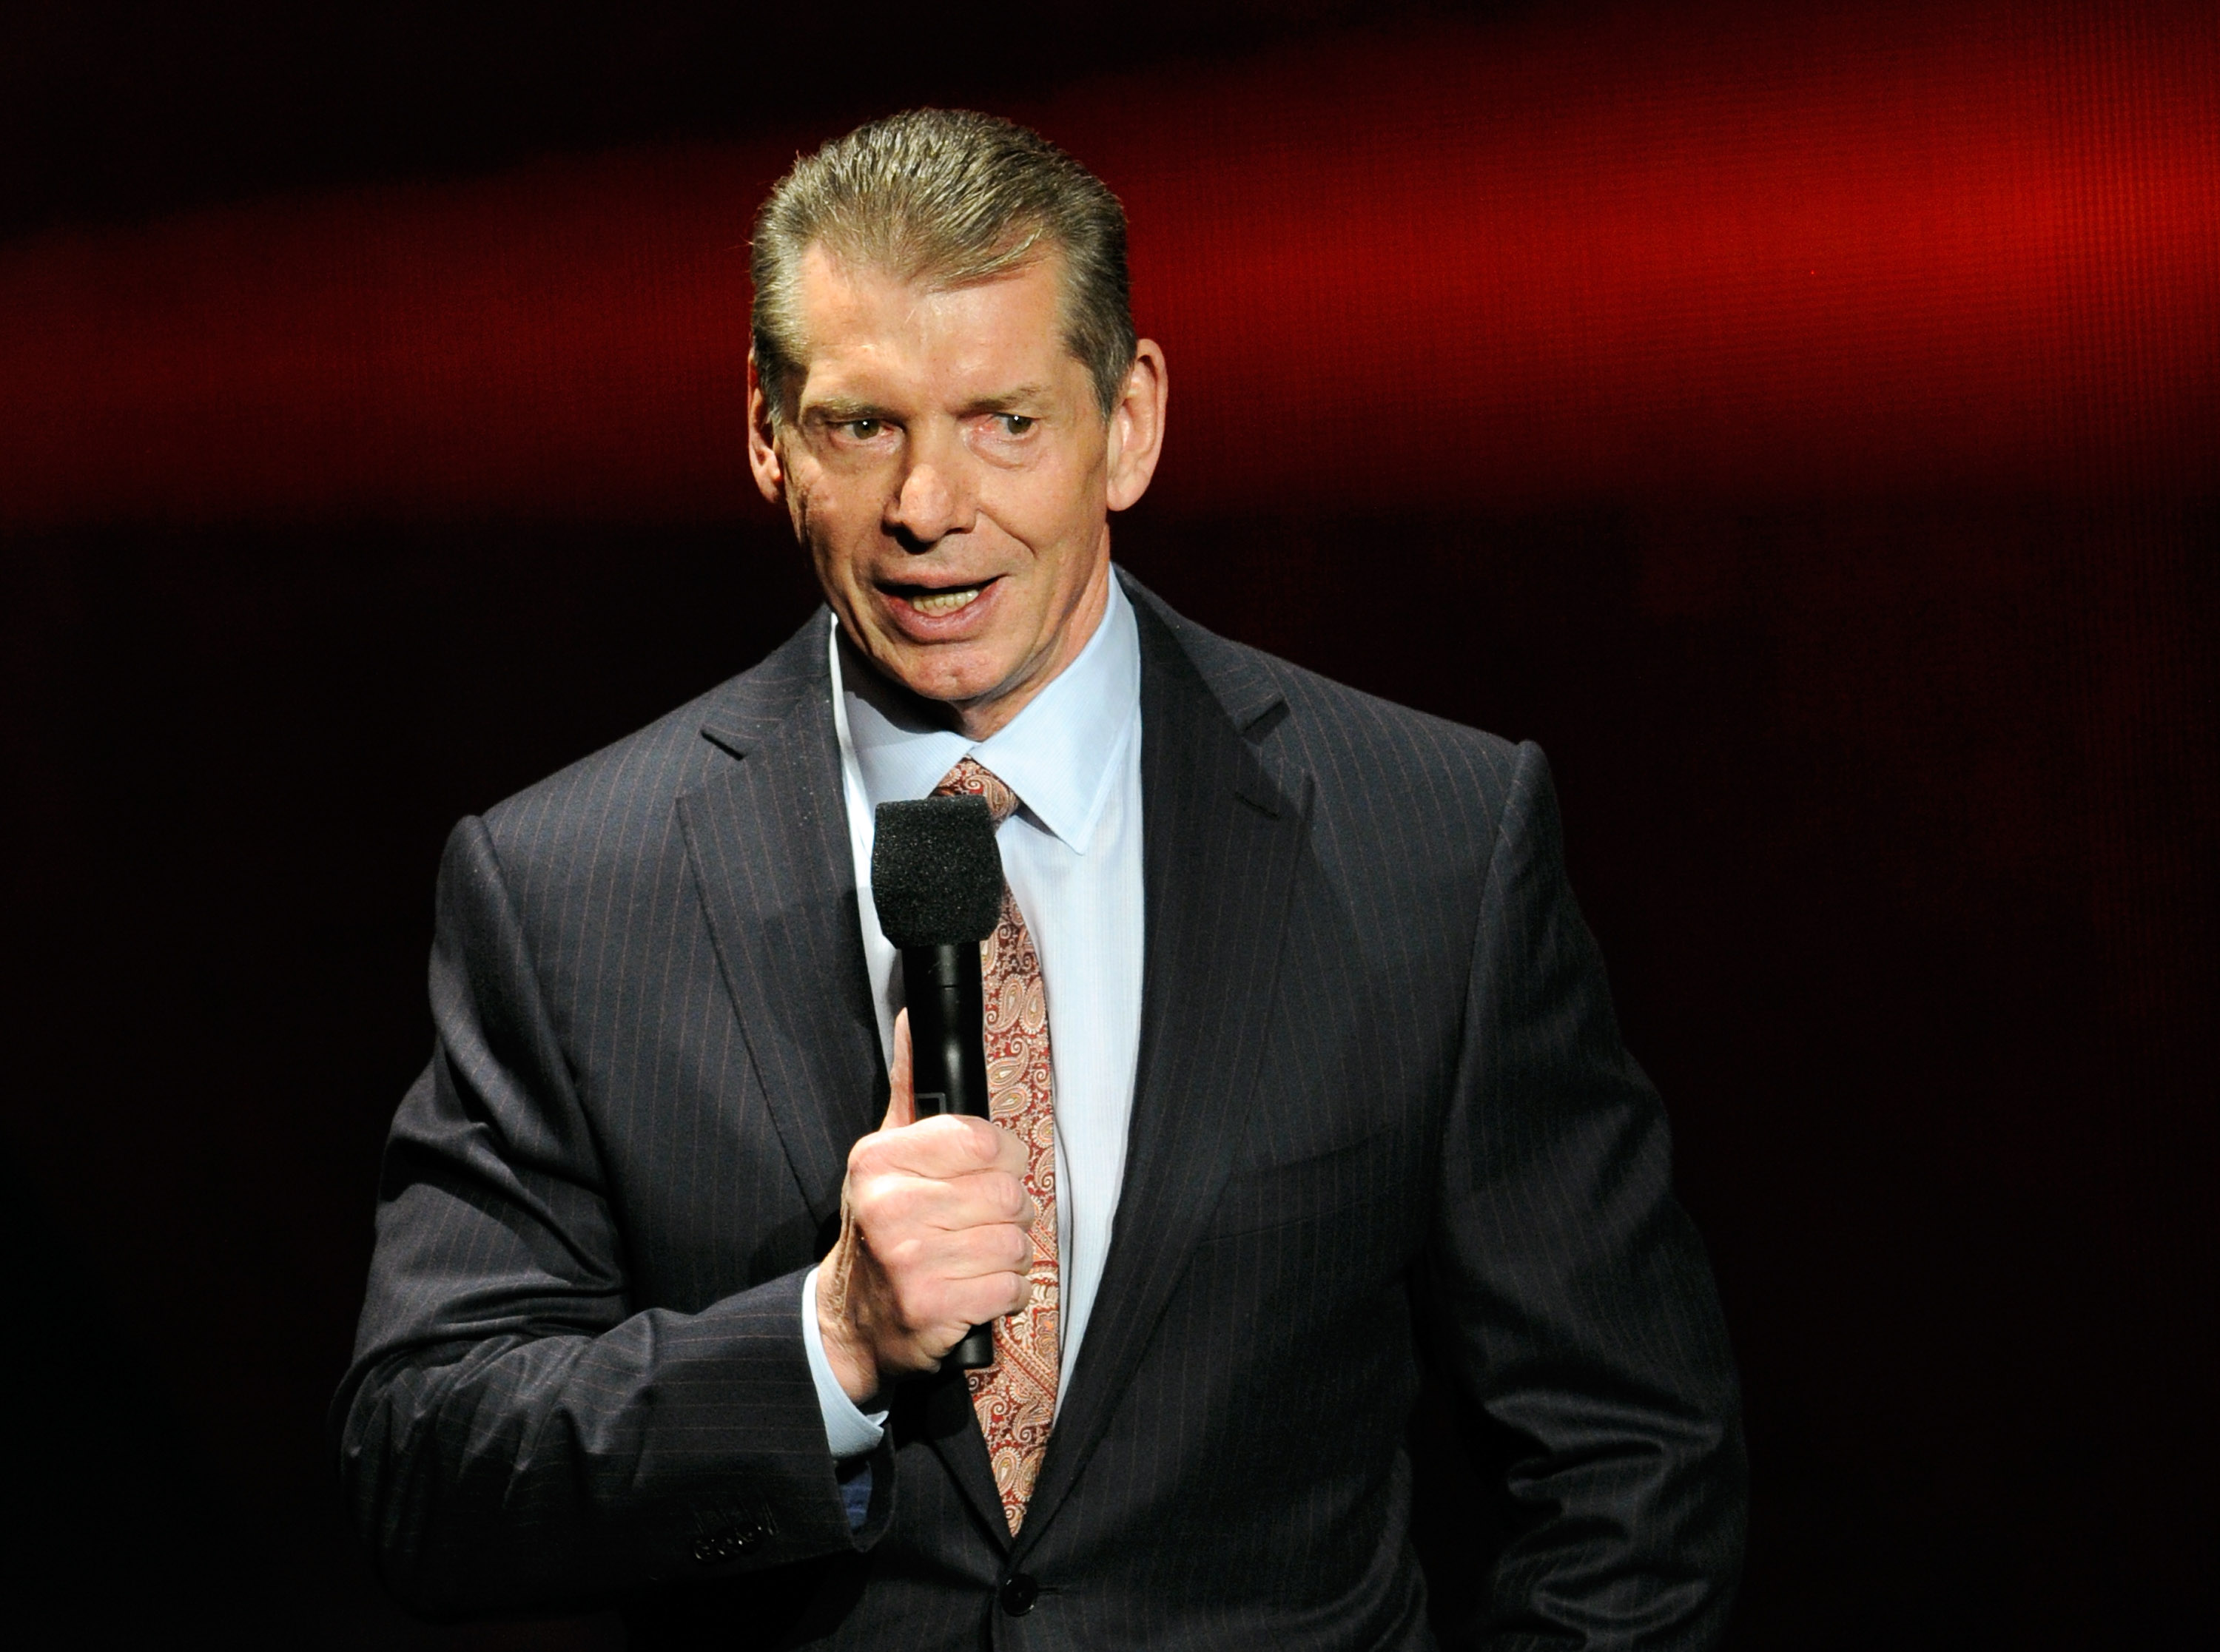 WWE faces boycott calls over “sexual slavery” accusations